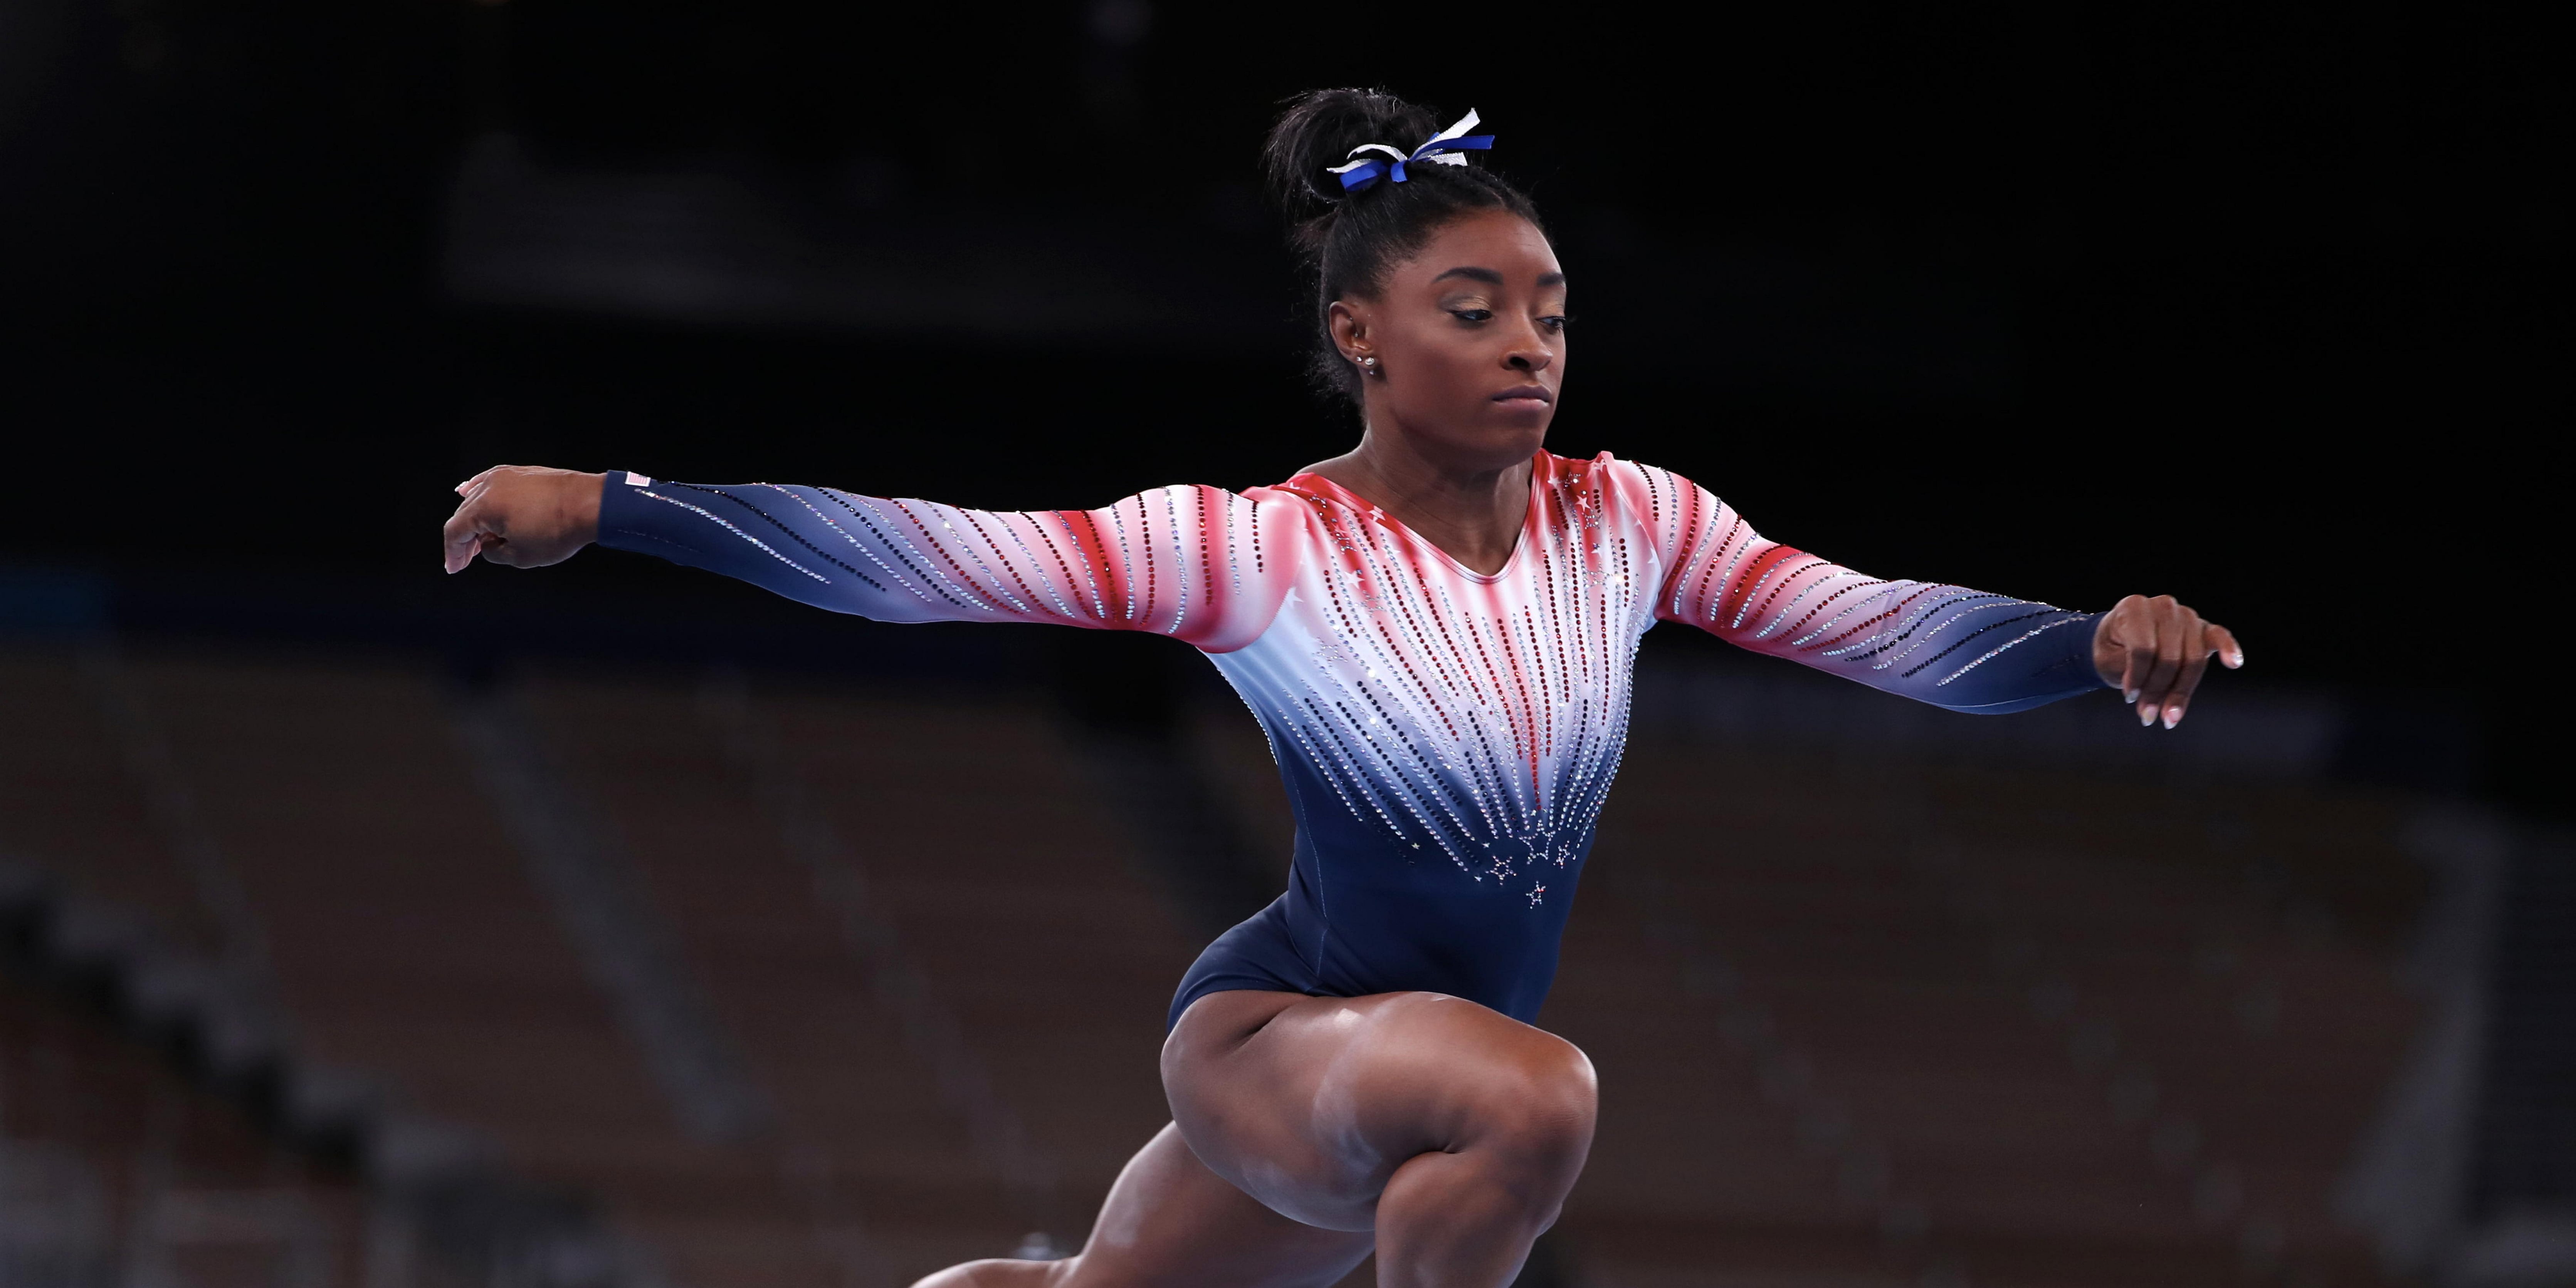 How Olympic Gymnastic Uniforms Have Changed Over The Years